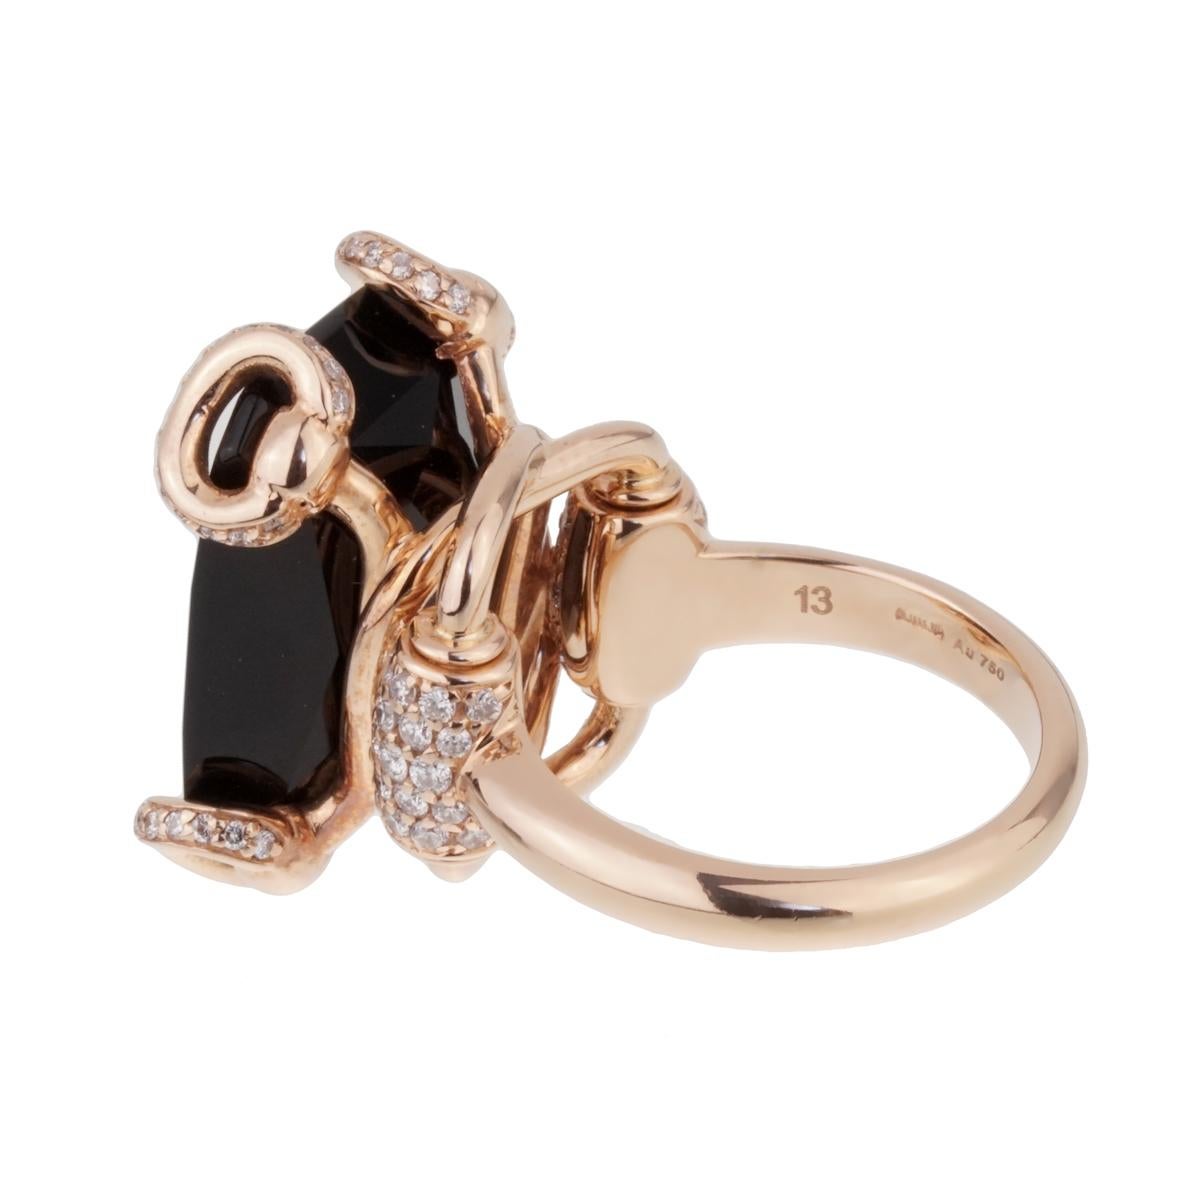 An iconic Gucci ring showcasing the glorious horsebit motif with a central faceted onyx adorned with round brilliant cut diamonds in 18k rose gold.